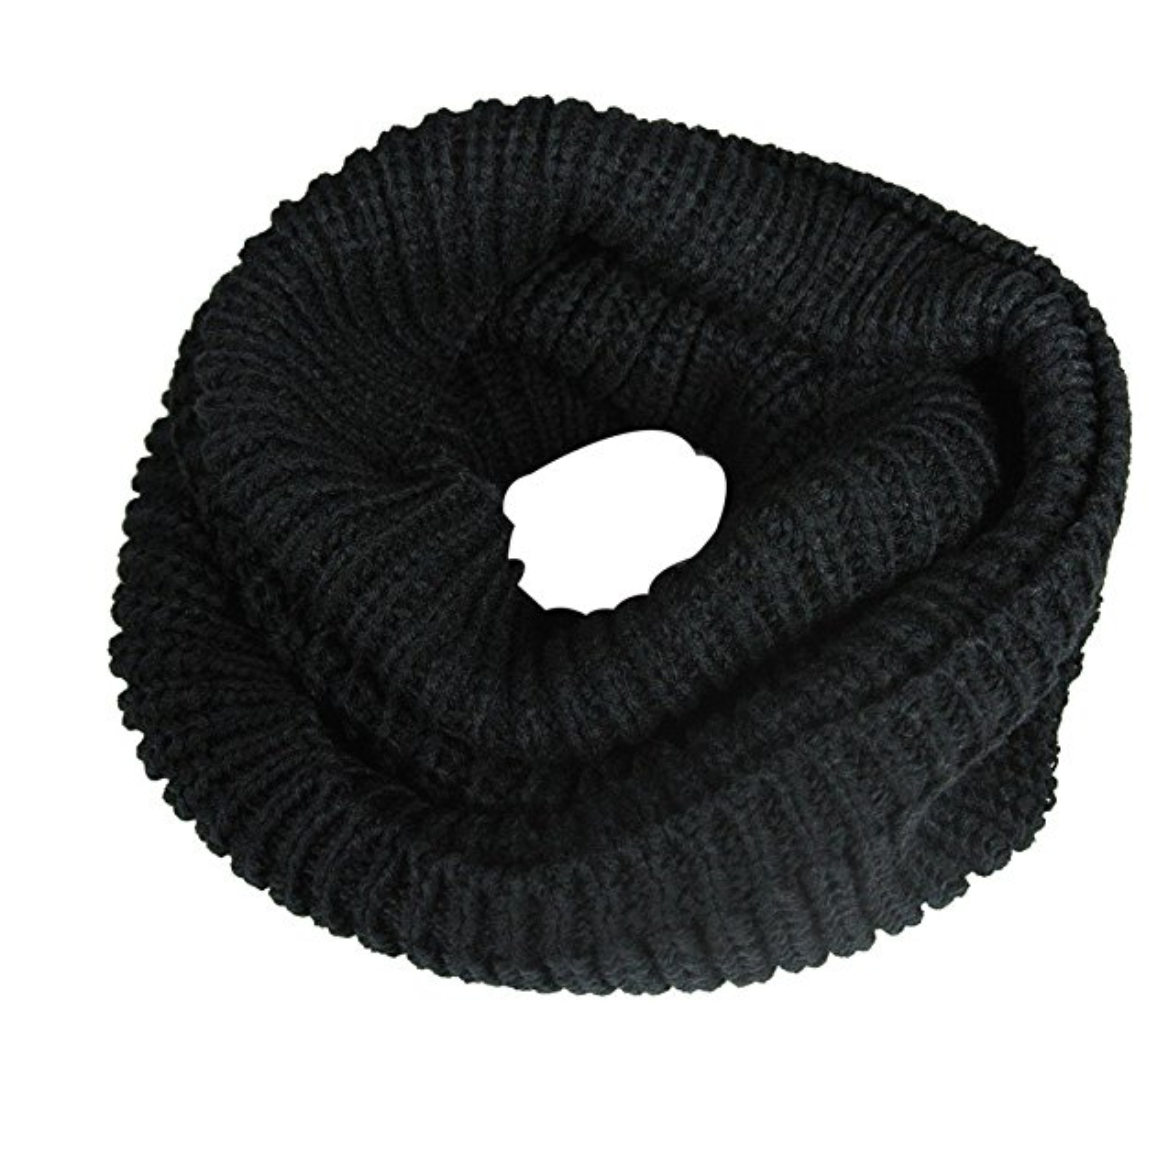 Solid Color Thick Knitted Winter Warm Infinity Scarves (Variety of colors)